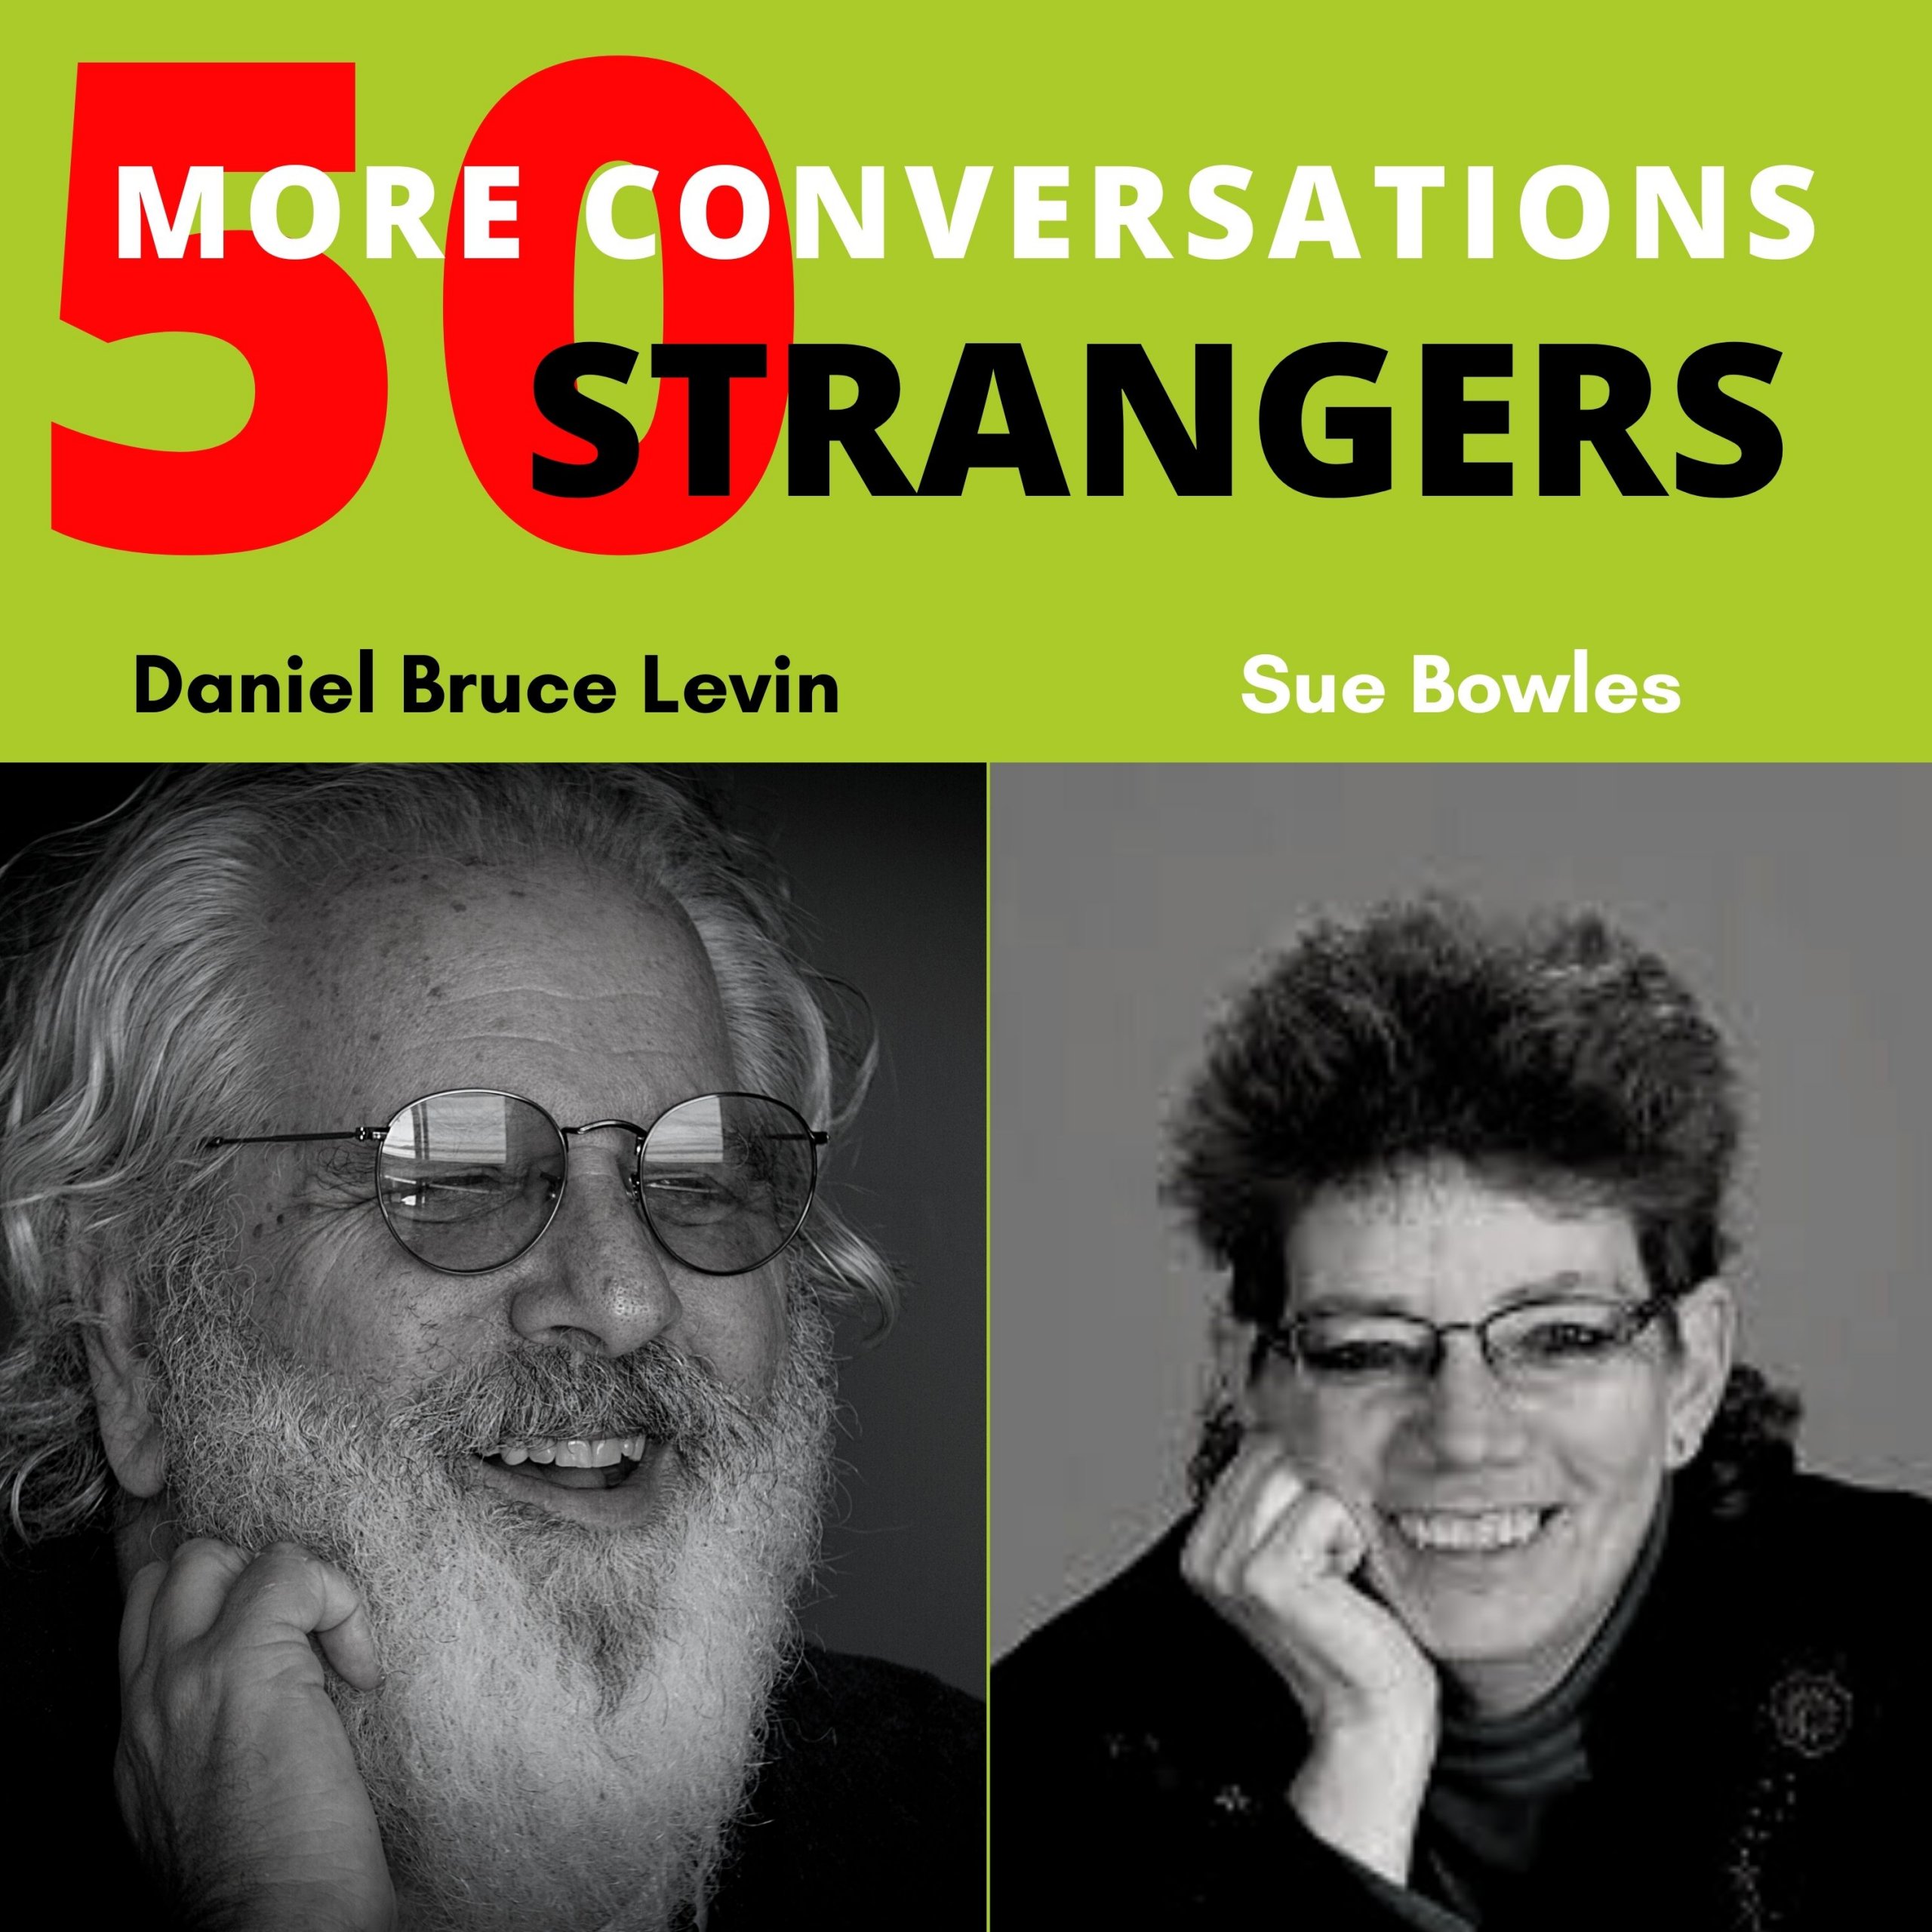 50 More Conversations with 50 More Strangers with Sue Bowles